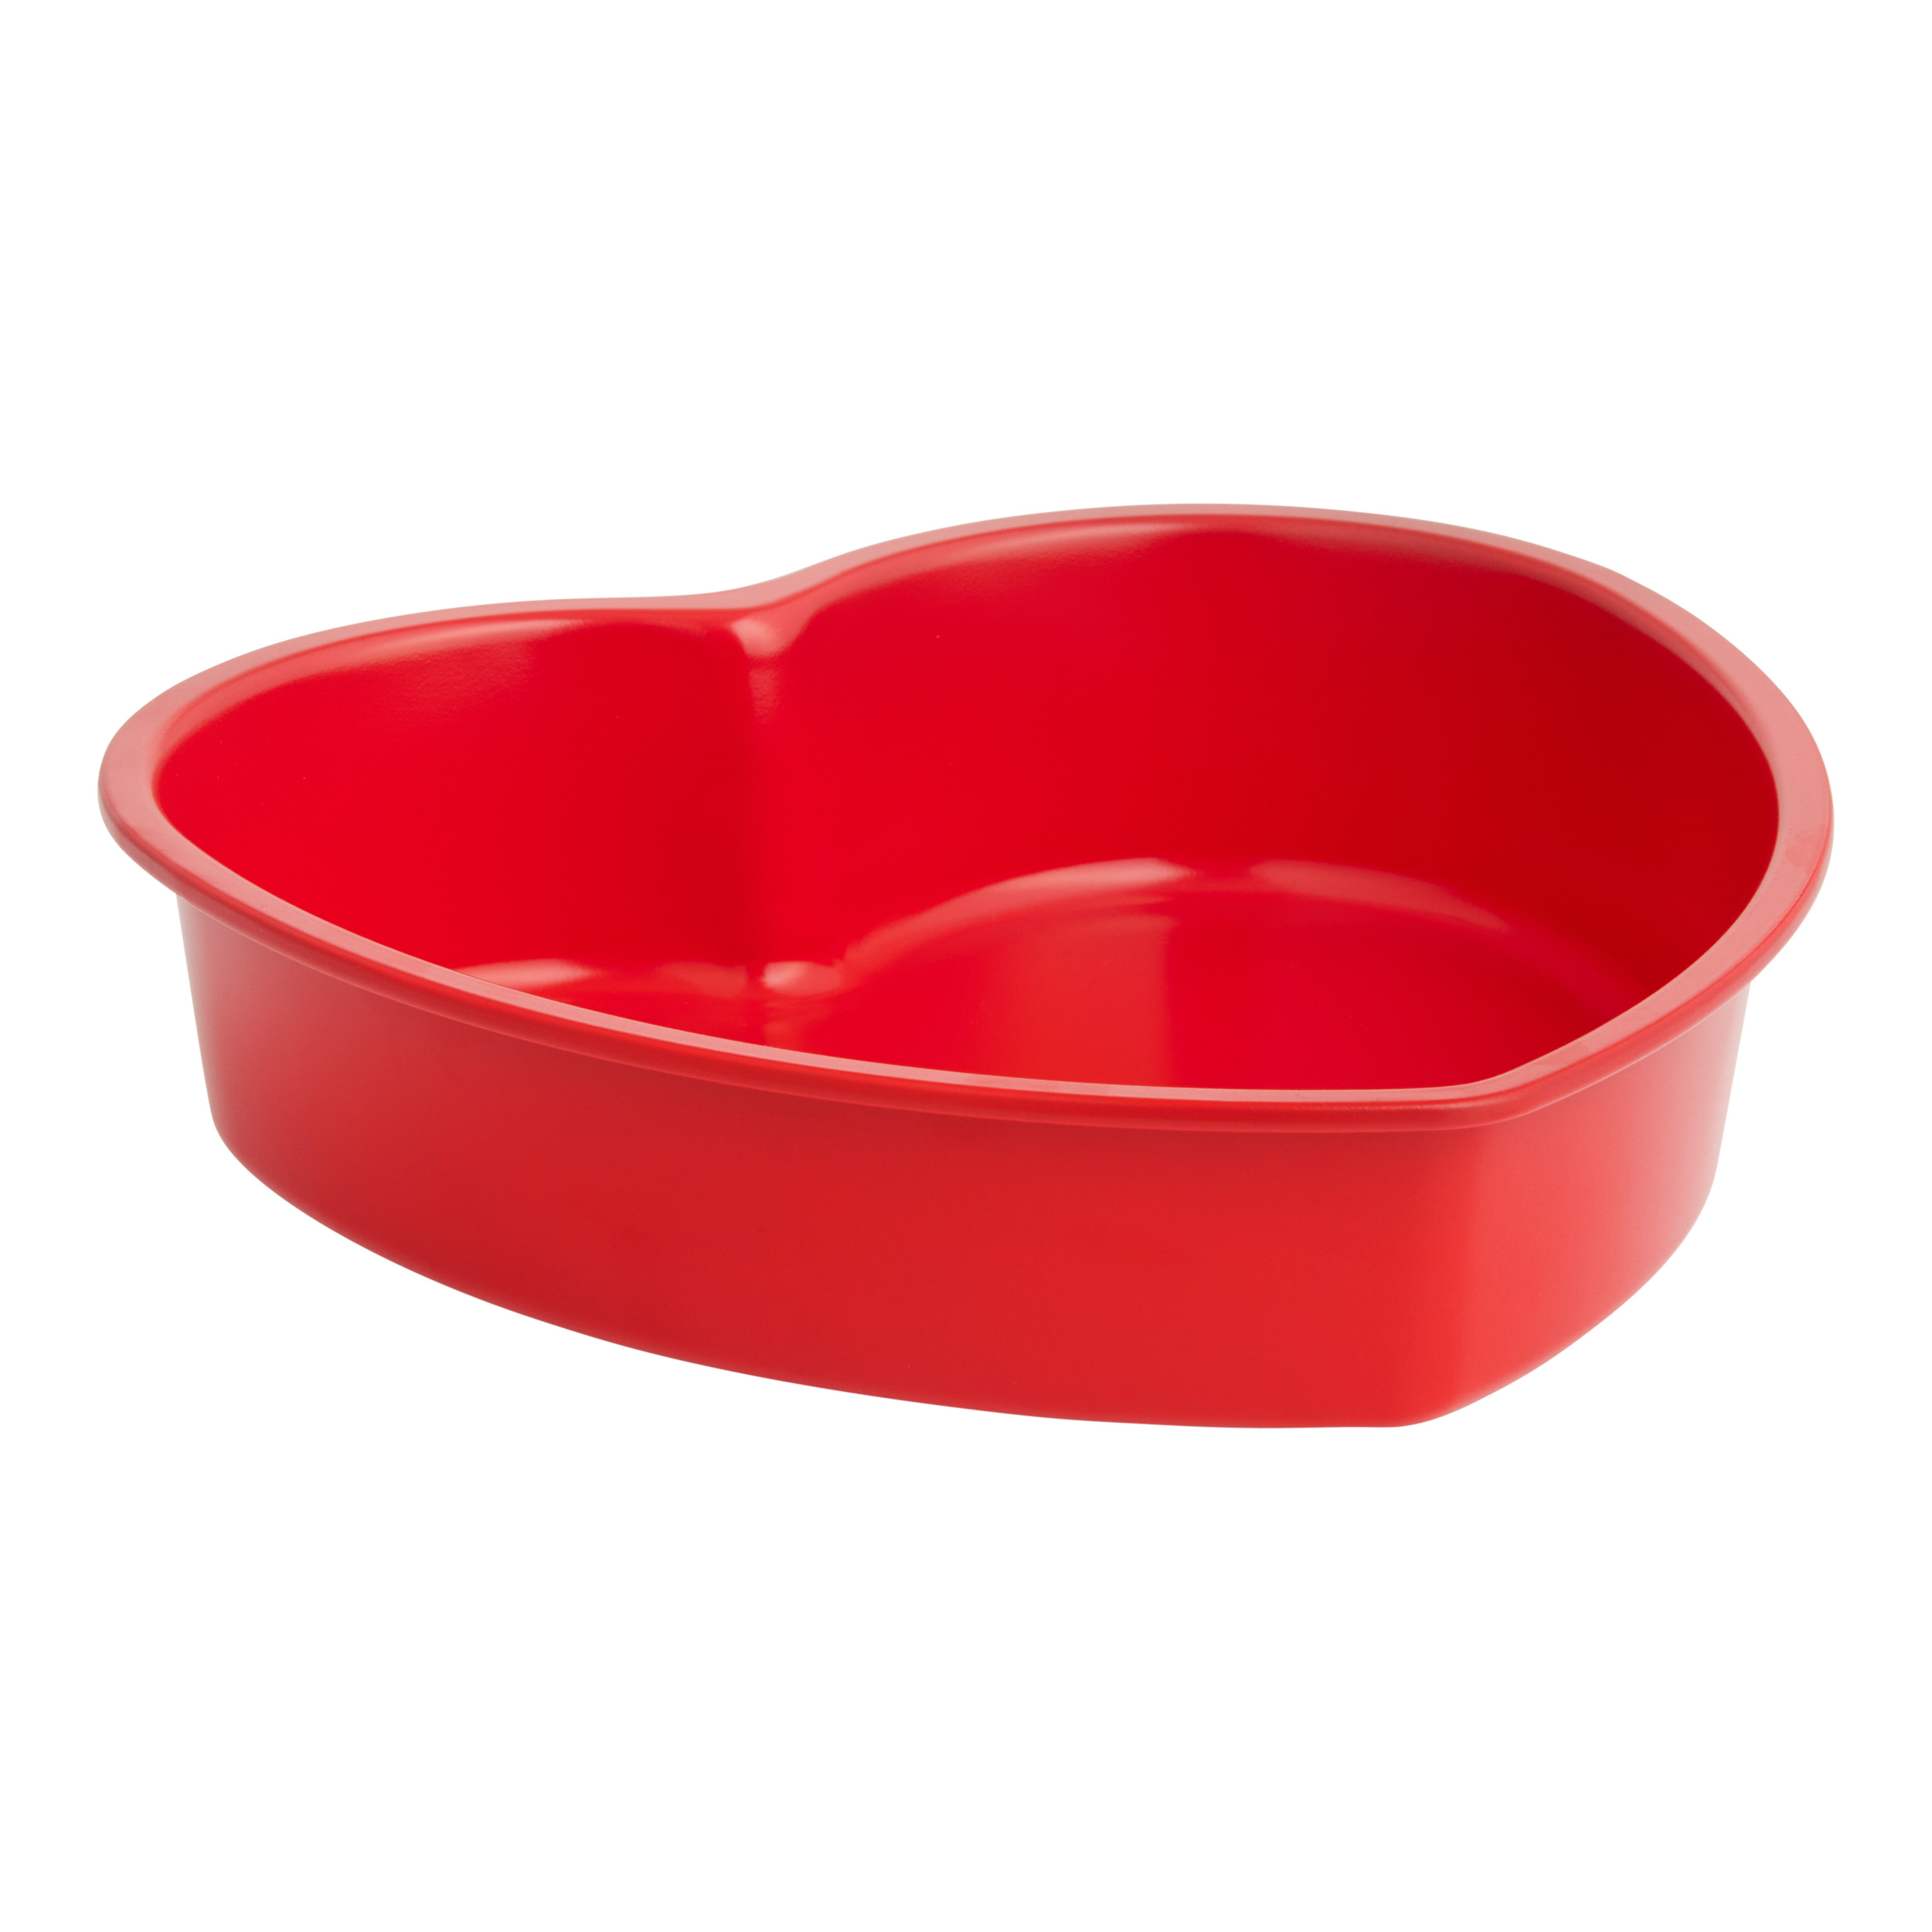 Non-Stick Original Heart-shaped Baking Pan in Copper Finish - 9-Inch — Red  Co. Goods